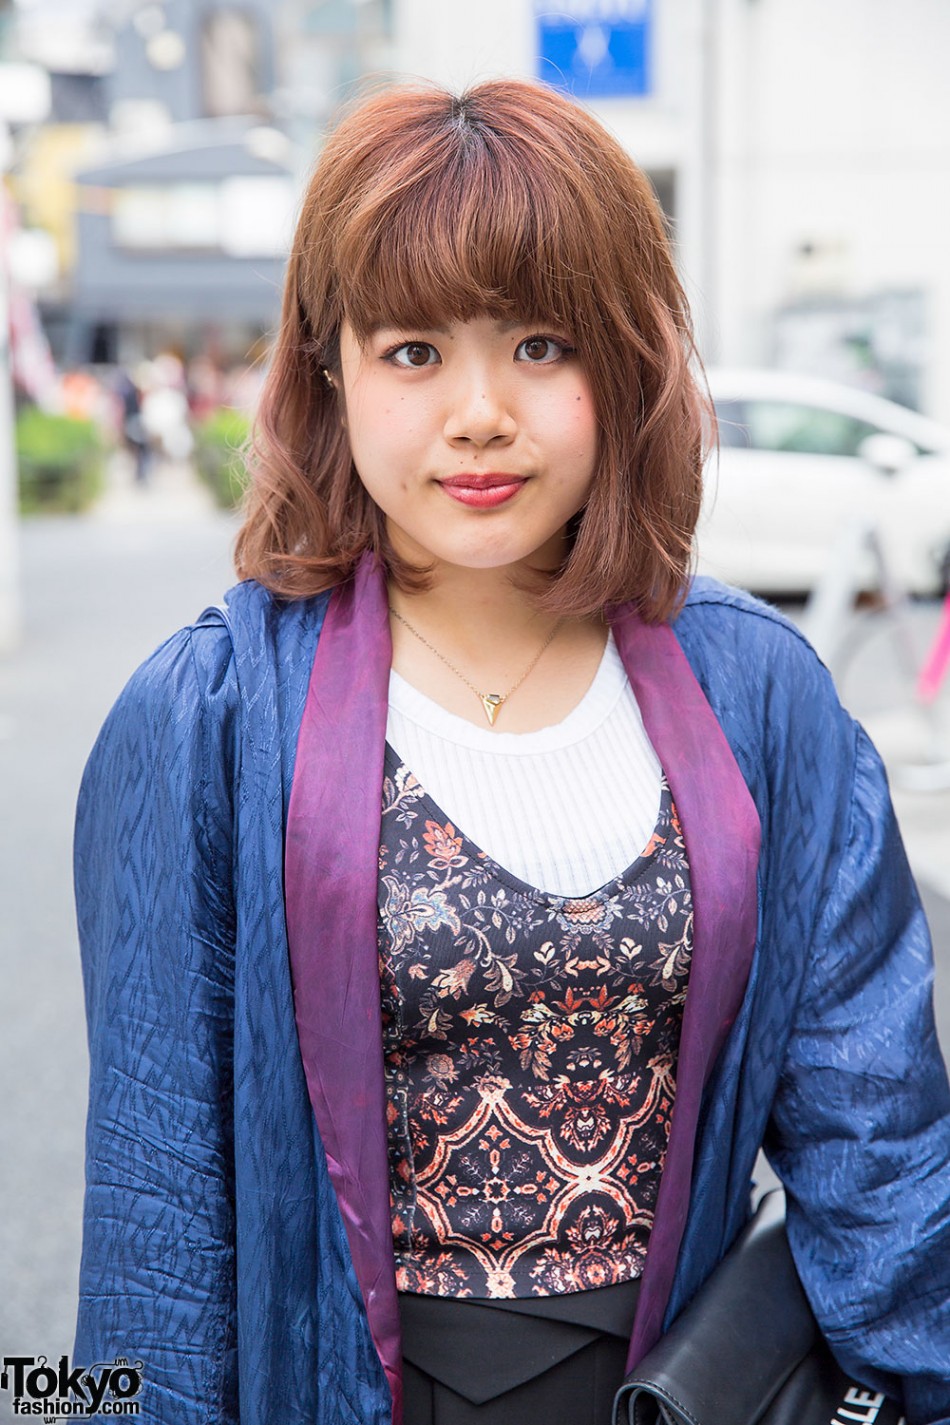 Harajuku Girl in Moussy, Gallerie, H&M, Topshop & Vintage Items